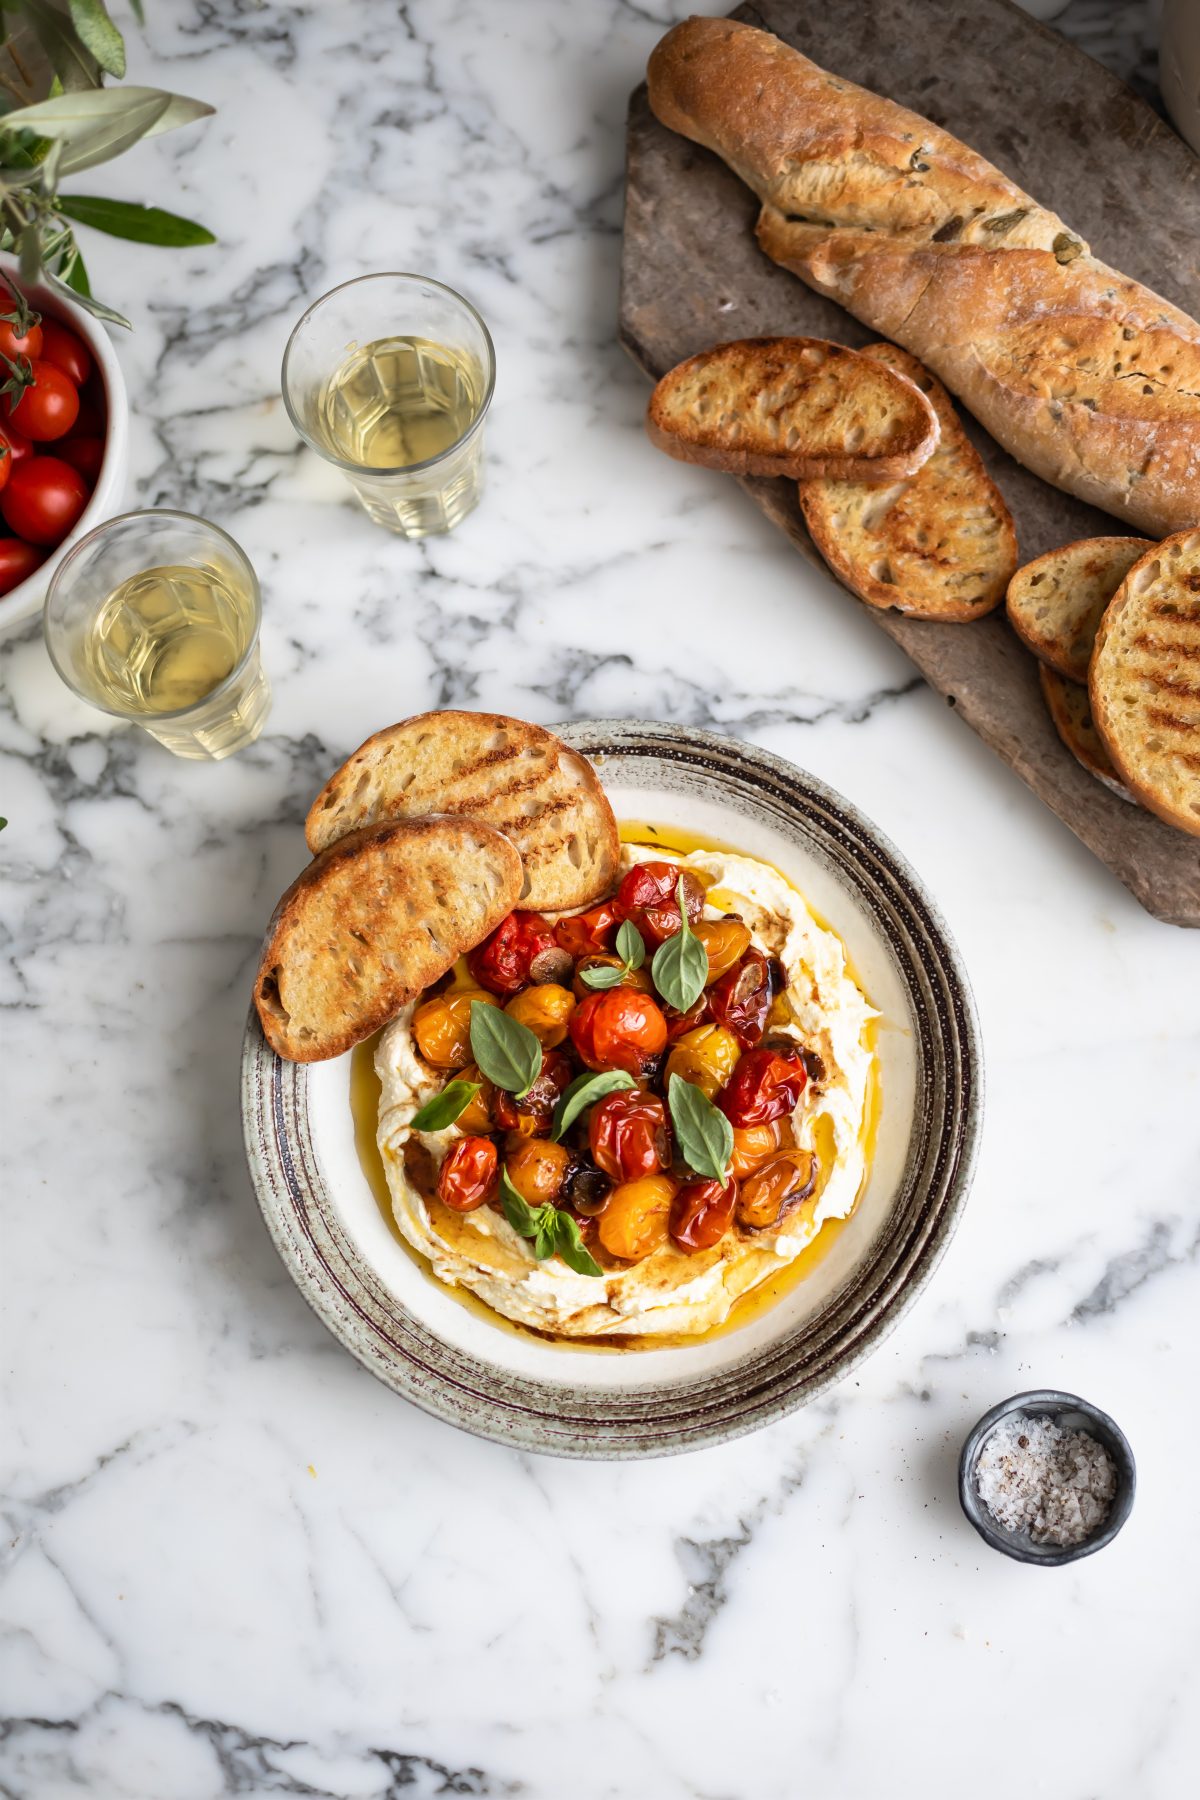 A plate of whipped feta with roasted tomatoes and garlic and toasted ciabatta